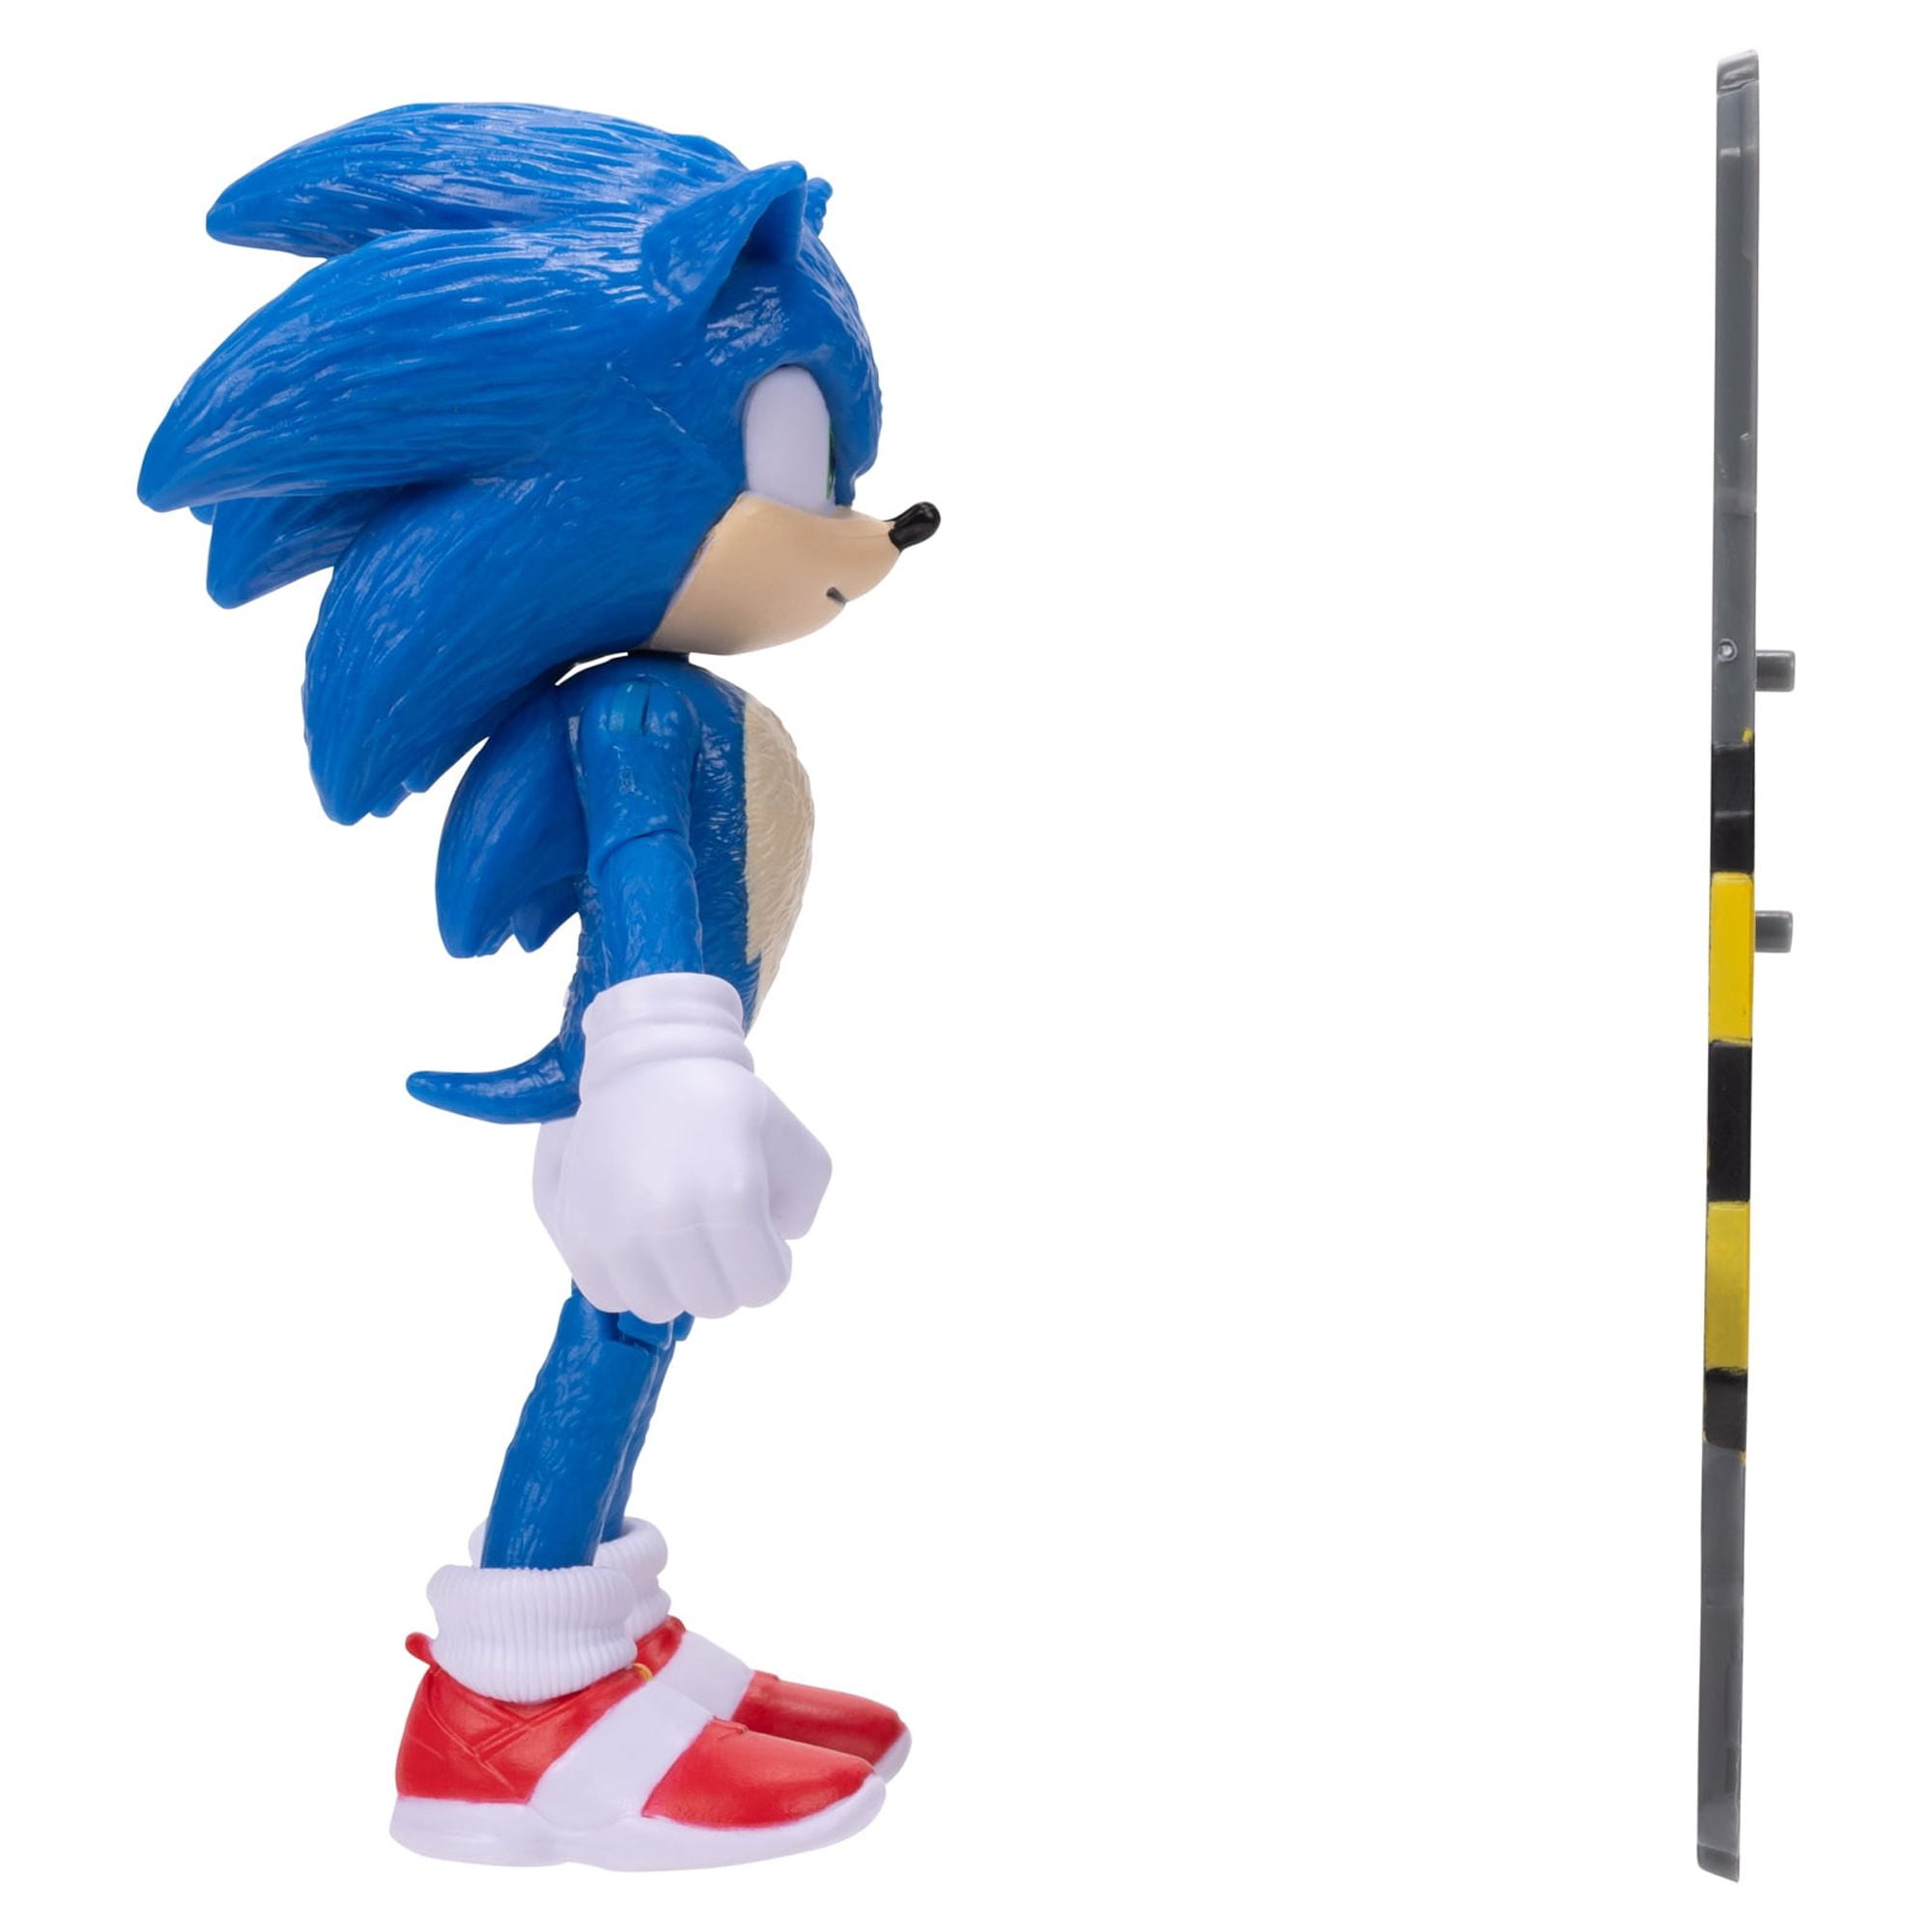  Sonic The Hedgehog 2 Movie Series 4-inch Action Figure Super  with Master Emerald 41497 : Toys & Games